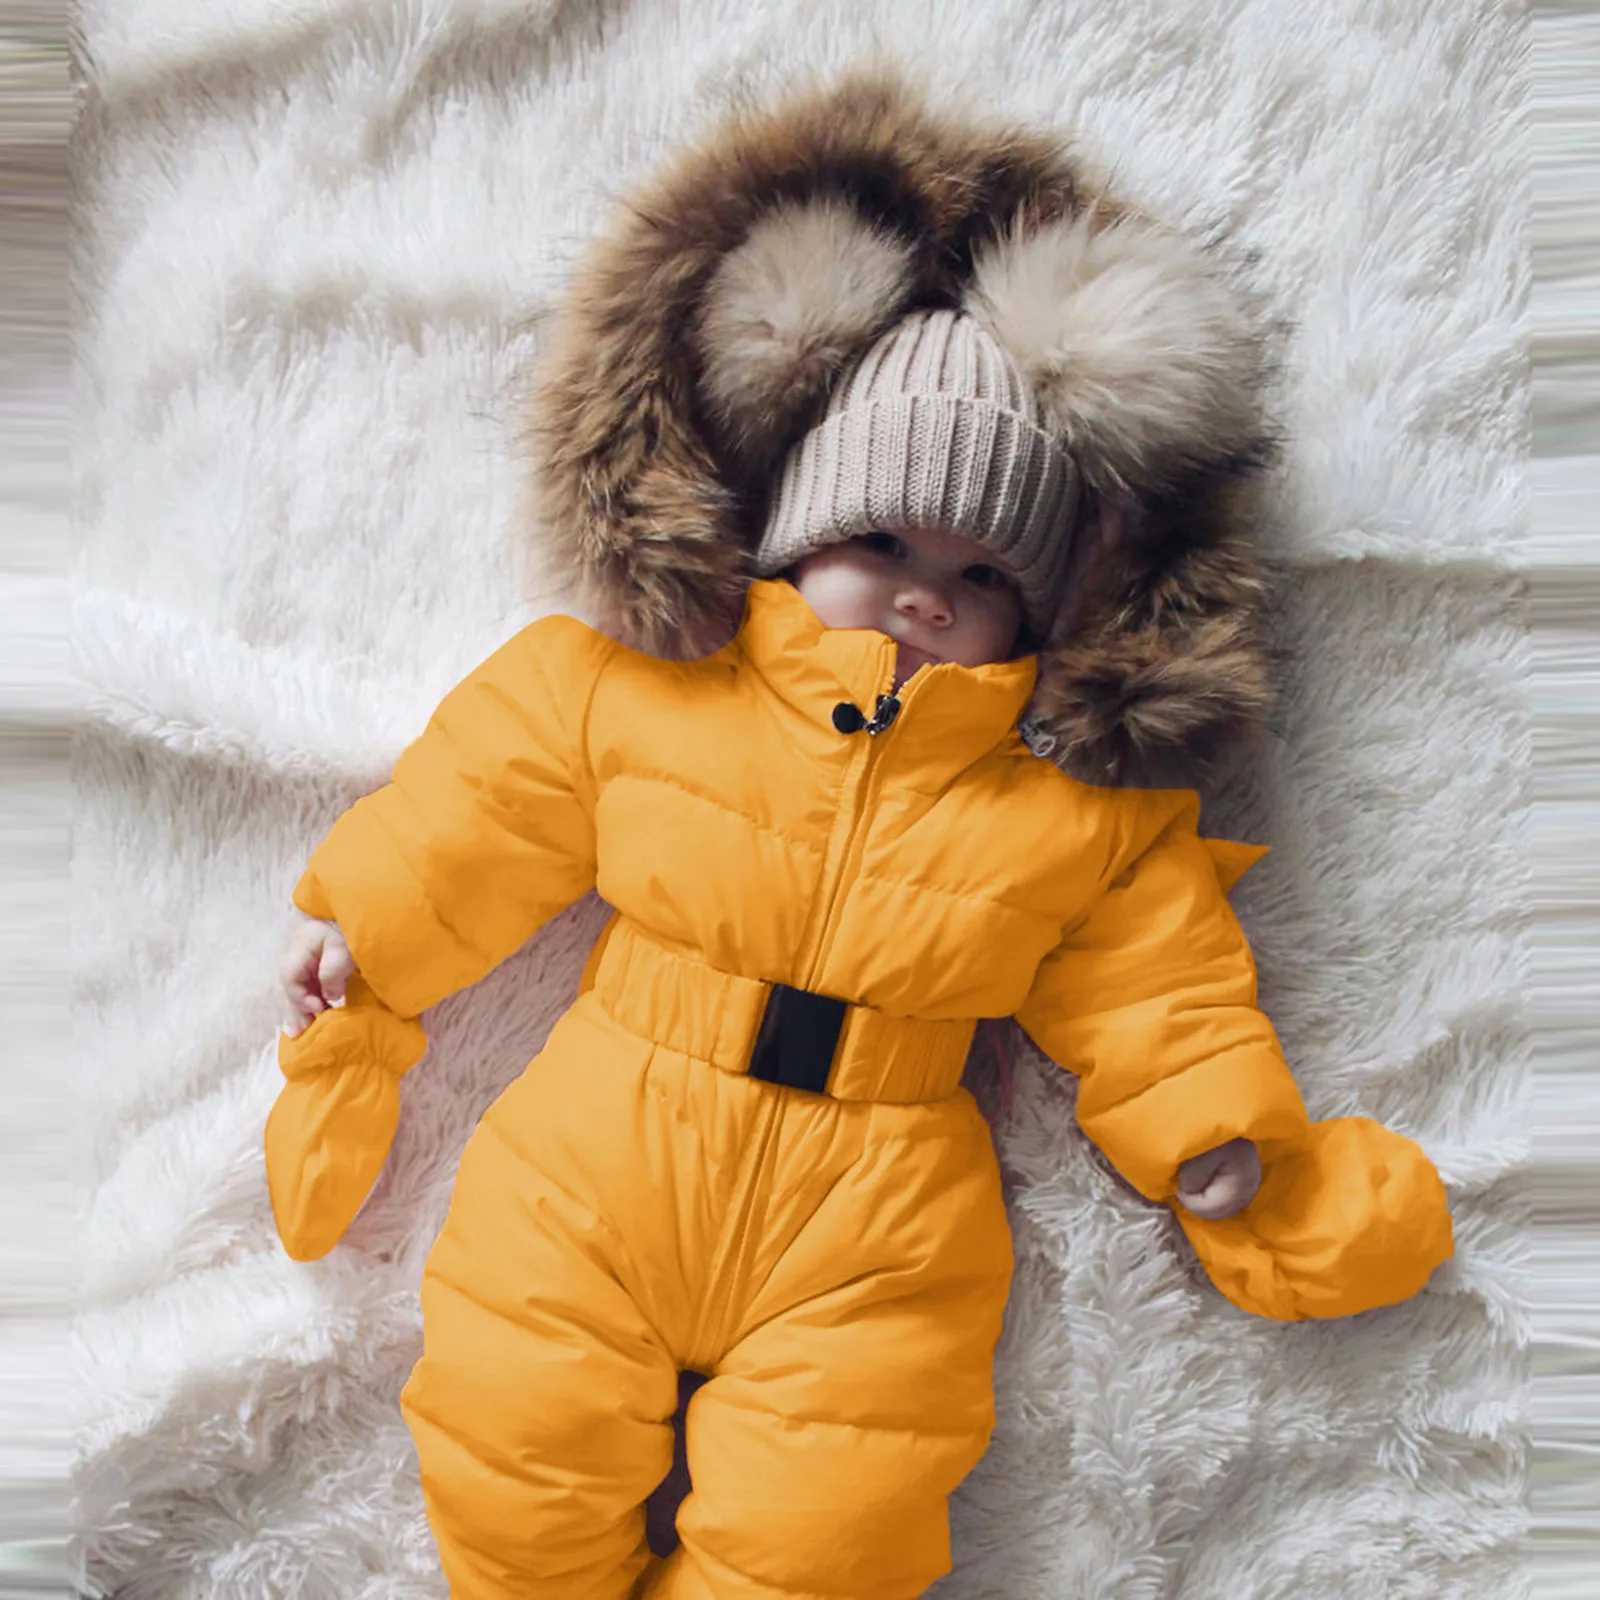 Baby Winter Warm Romper Snowsuit Jacket Hooded Jumpsuit Coat Infant Girl Outfits 